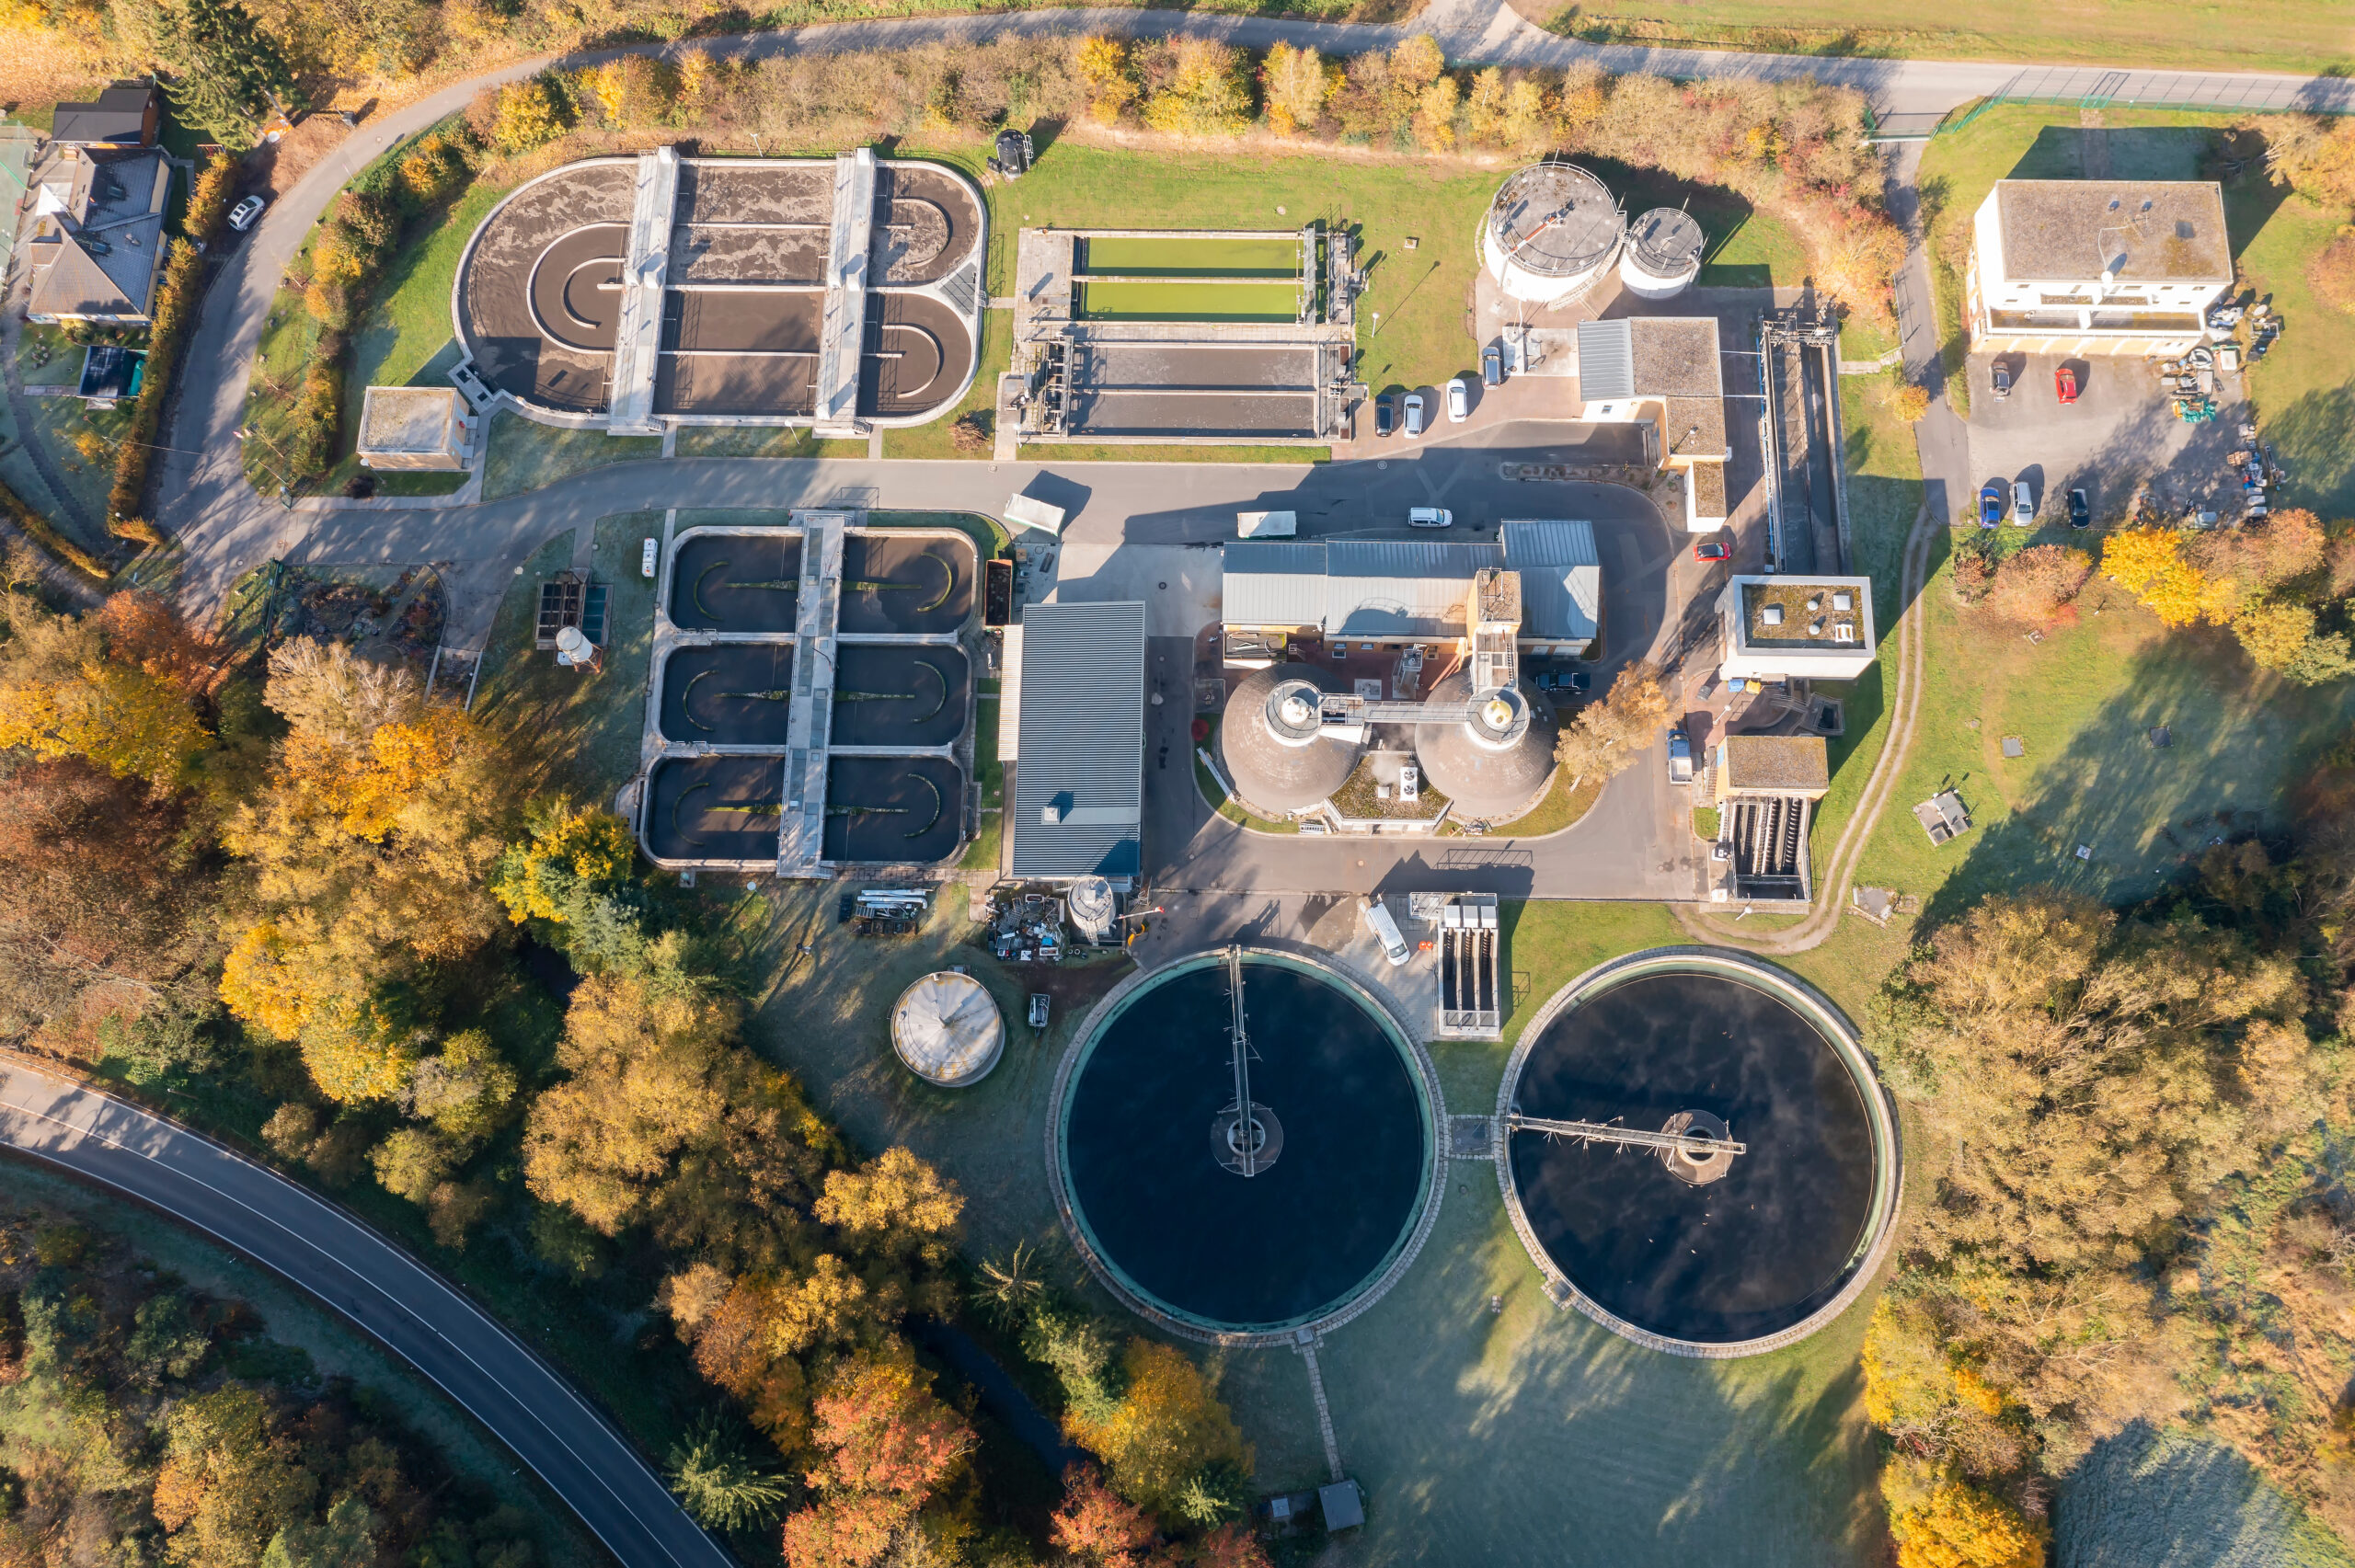 Bird's eye view of a small sewage treatment plant in the Taunus